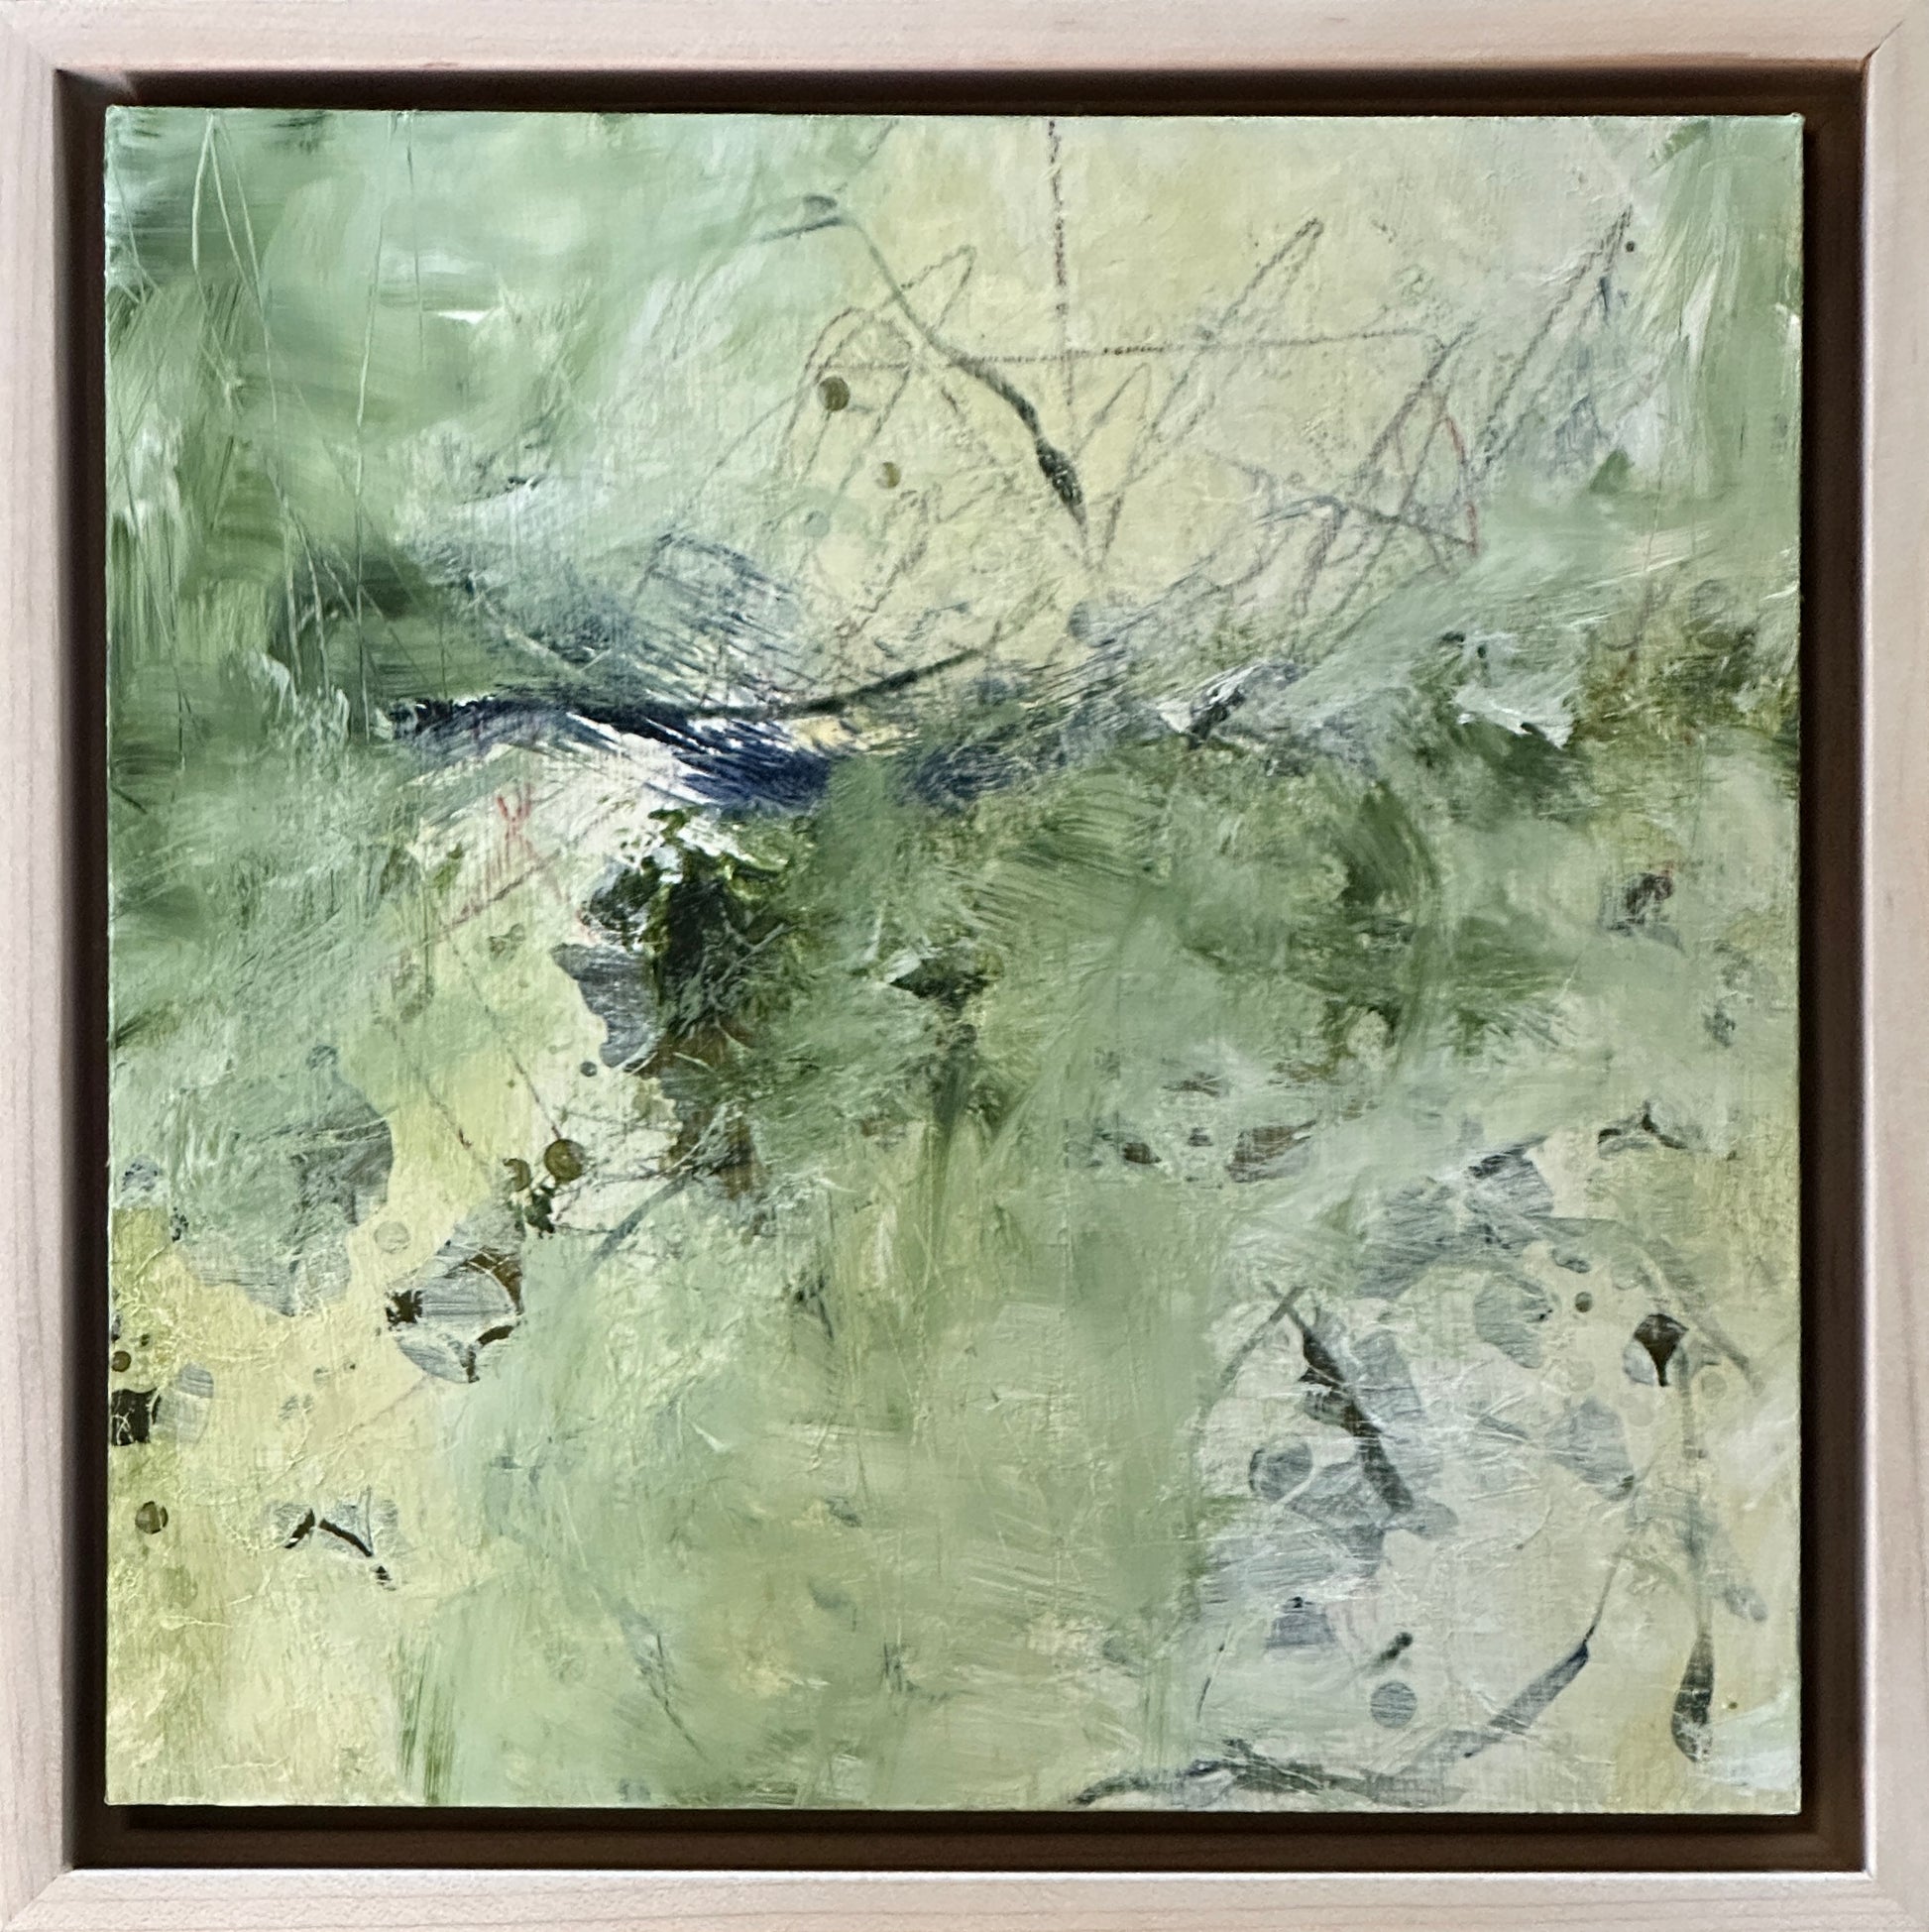 8 x 8 x 1.5-inch, framed, impression of an abstract landscape near a river with the rawness of nature.  Acrylic painting on cradled panel with natural wood frame.  By Cumming, GA artist, Juanita Bellavance. Part of our 25 Days of Minis 2022 collection.  Collect them all!